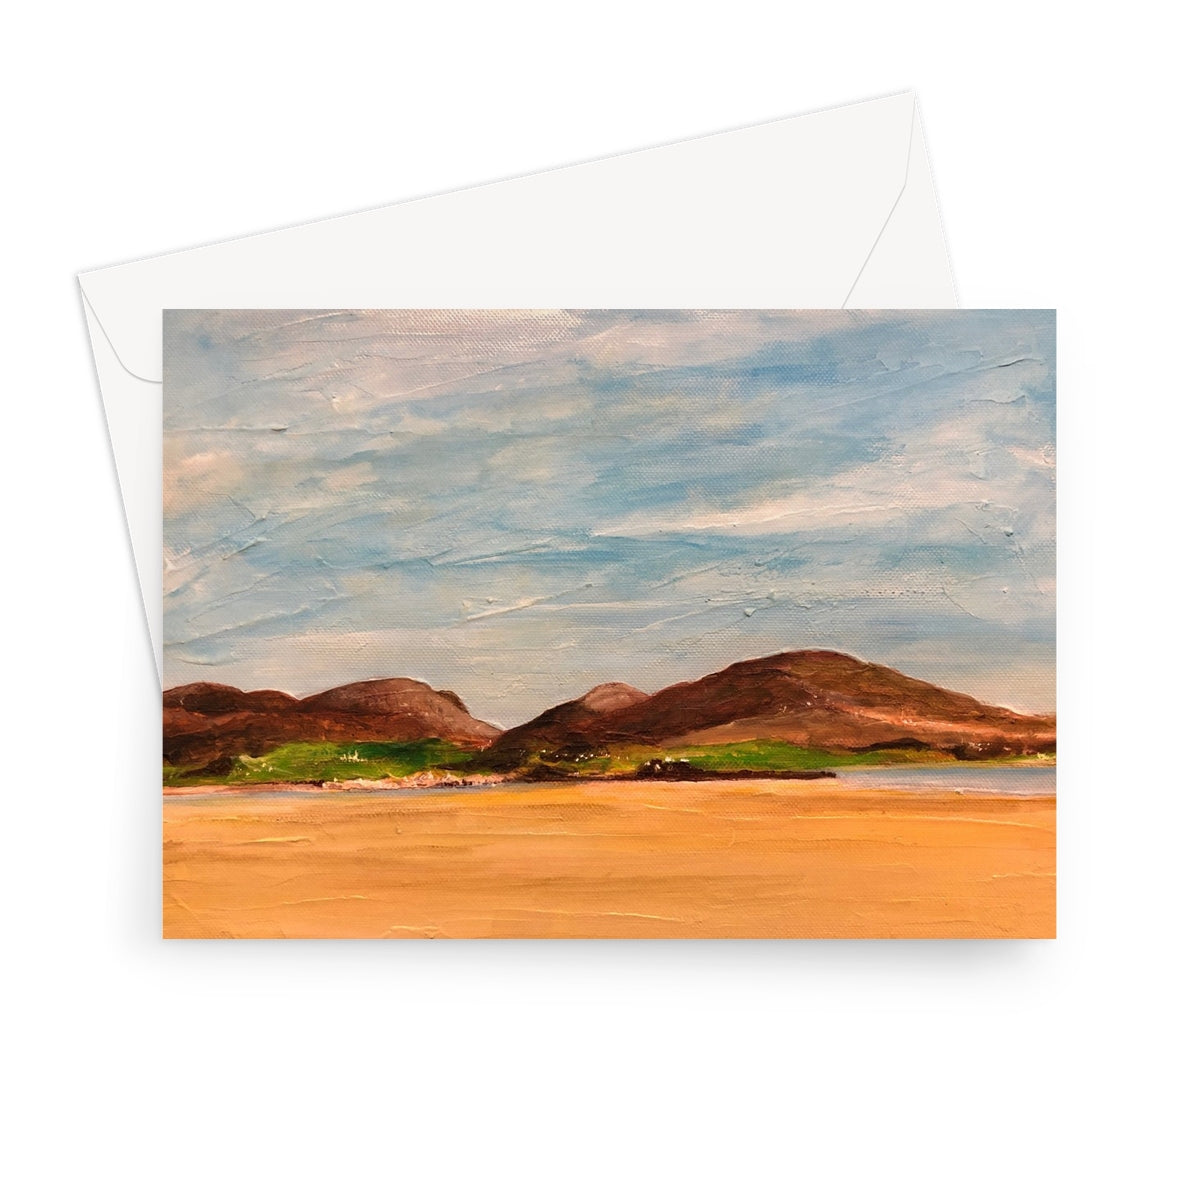 Uig Sands Lewis Art Gifts Greeting Card-Greetings Cards-Hebridean Islands Art Gallery-7"x5"-1 Card-Paintings, Prints, Homeware, Art Gifts From Scotland By Scottish Artist Kevin Hunter